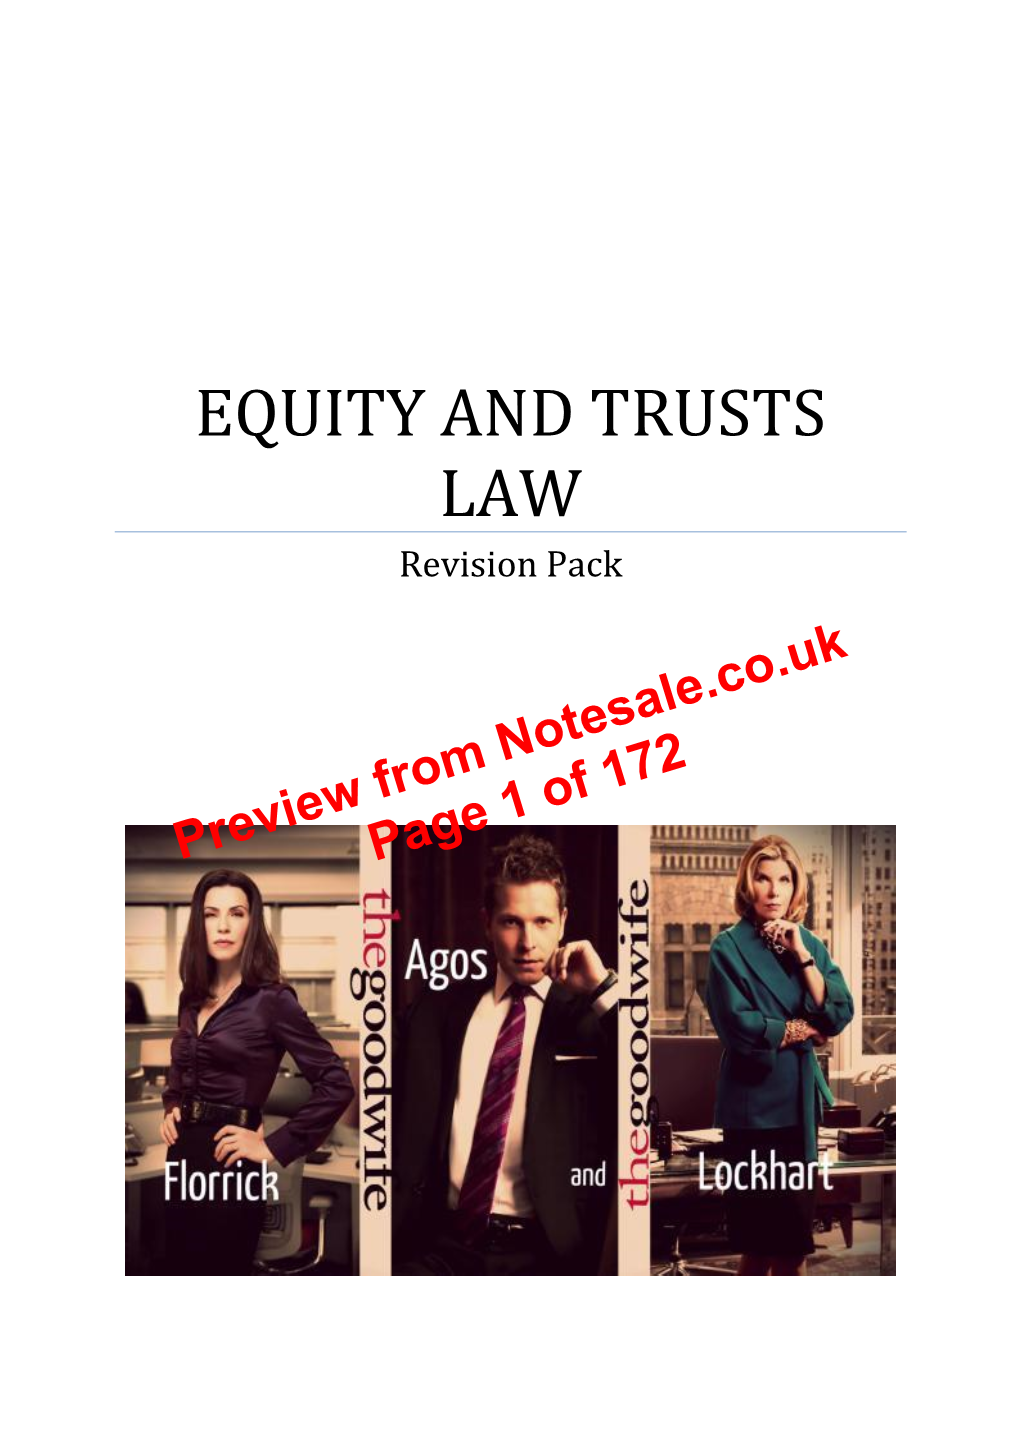 EQUITY and TRUSTS LAW Revision Pack